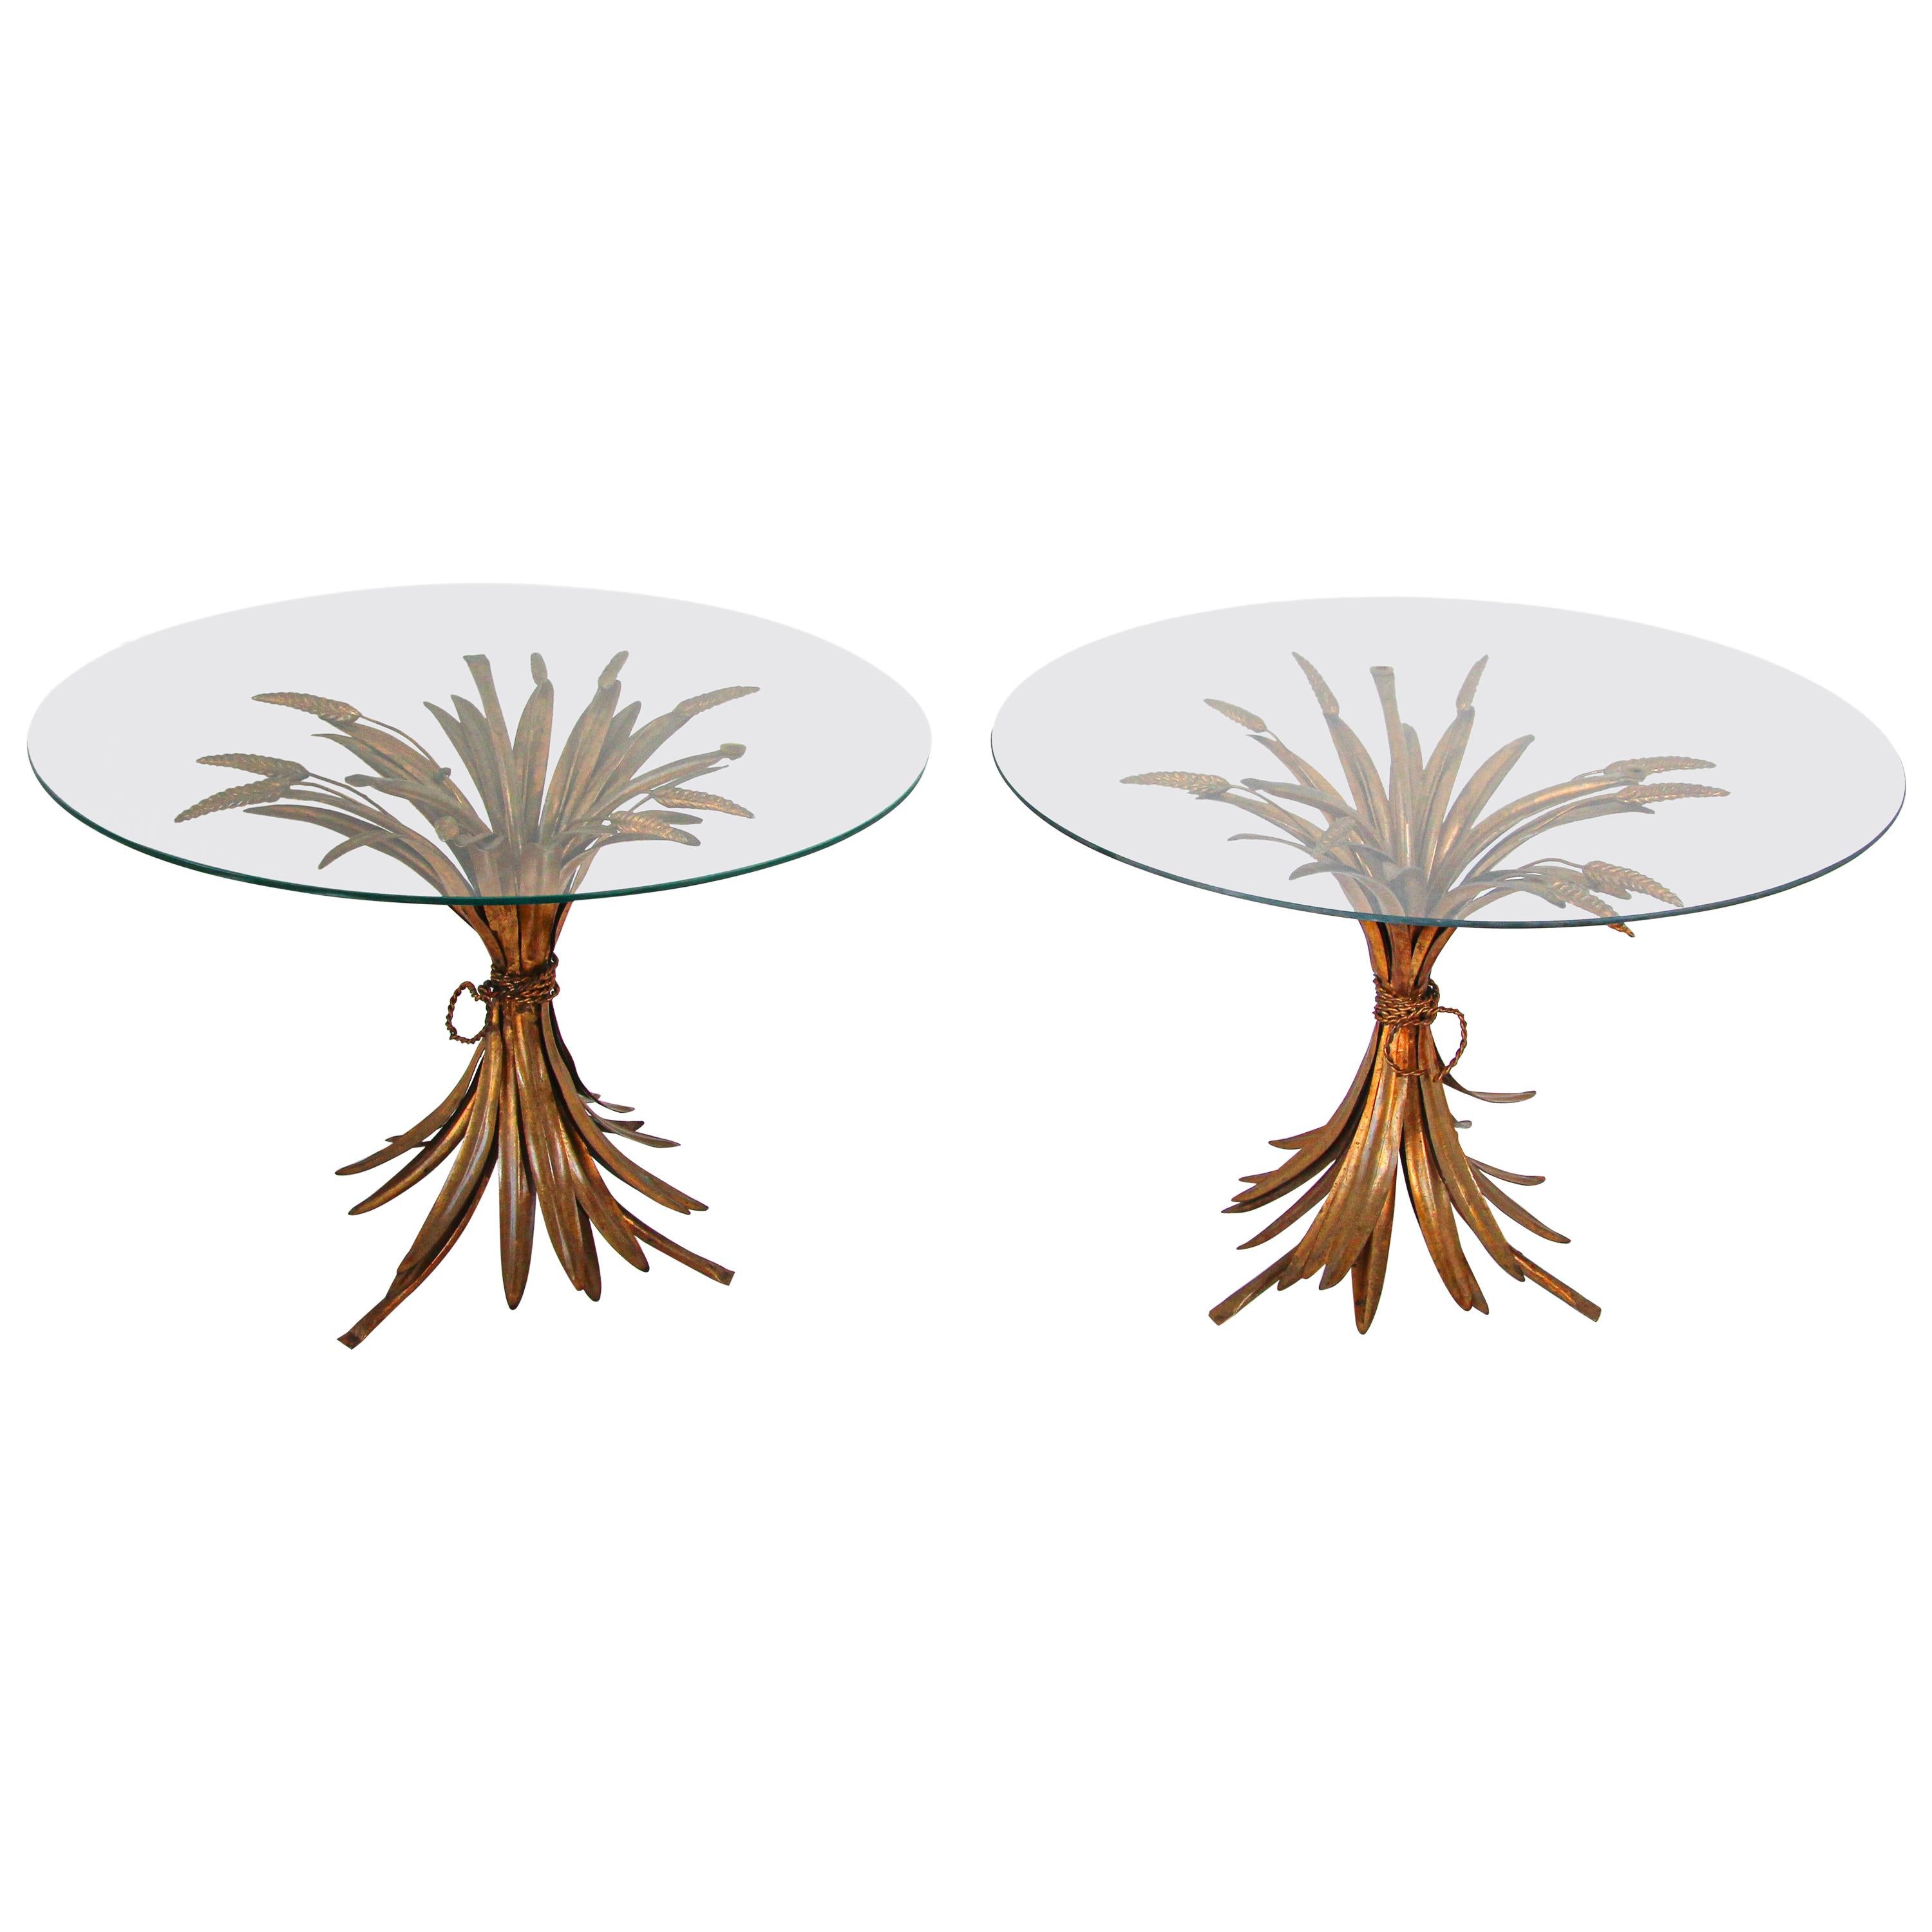 Pair of French Sheaf of Wheat Side Tables